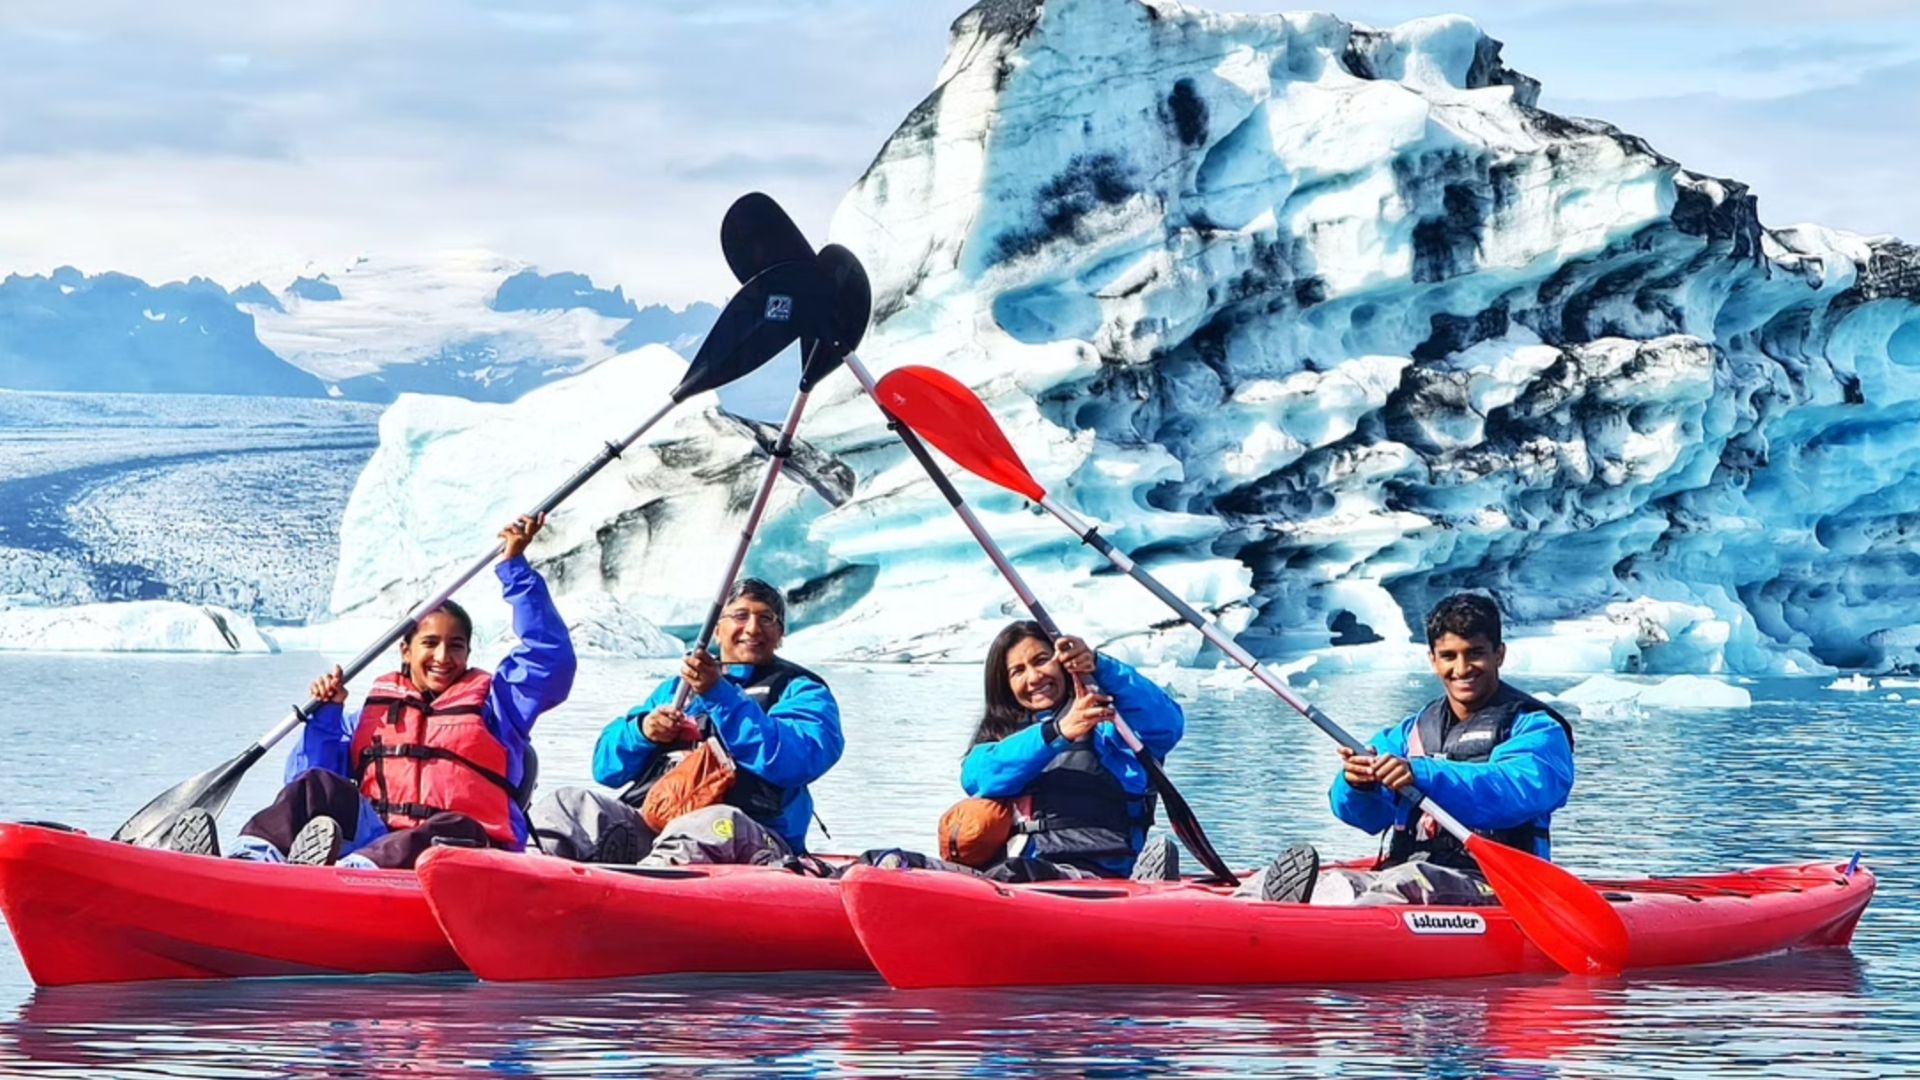 Kayaking on the Glacier Lagoon is an extreme activity to do in Iceland